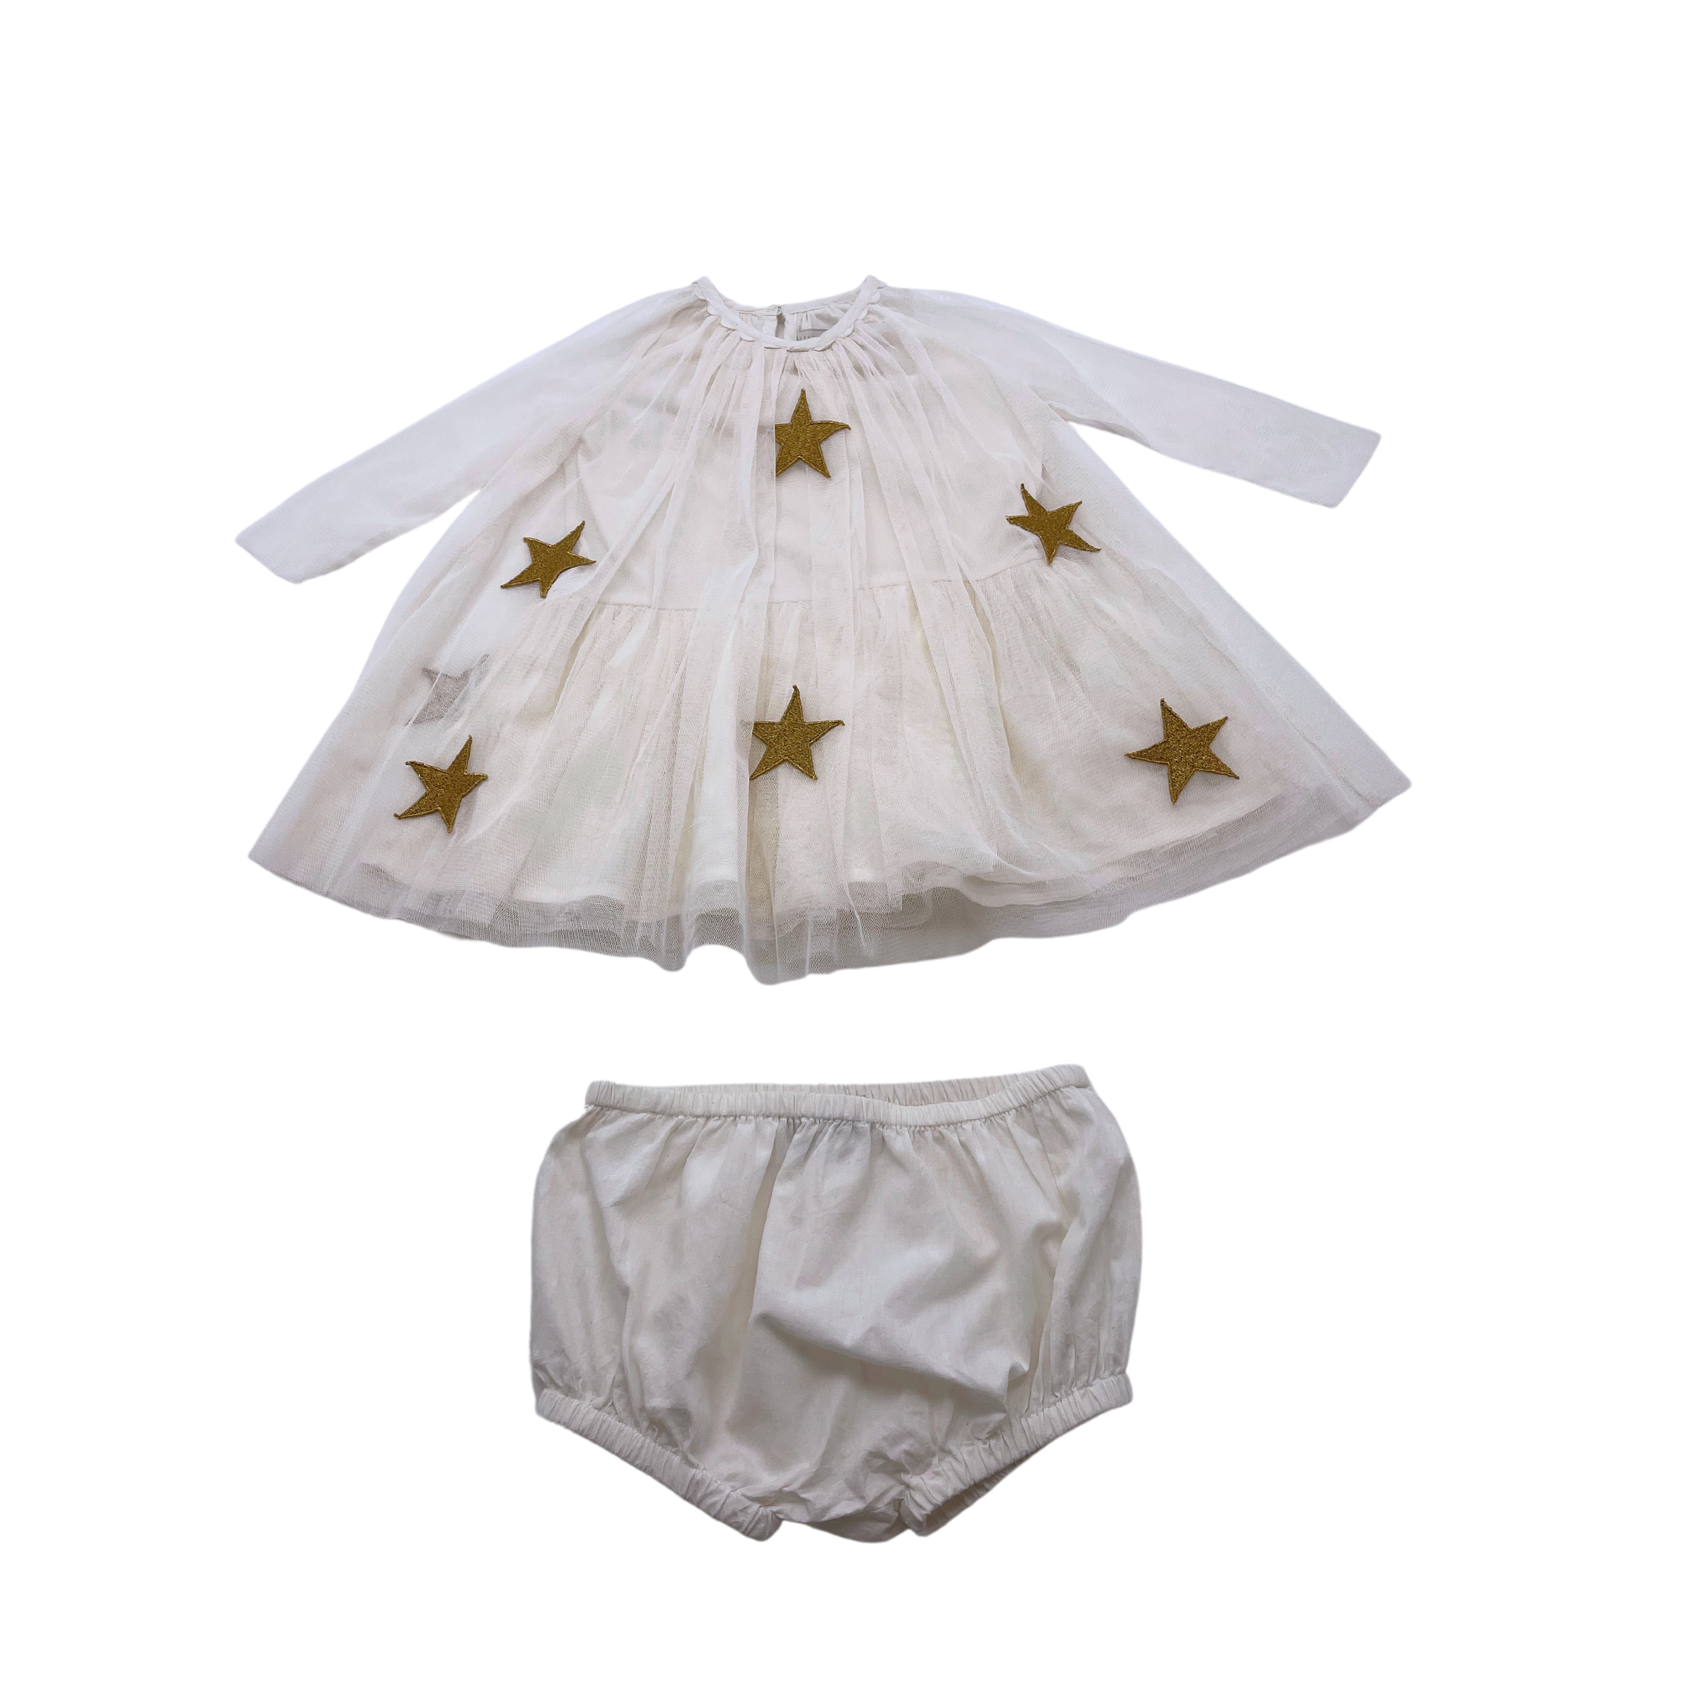 STELLA MCCARTNEY - Star dress with matching bloomers - 6 months